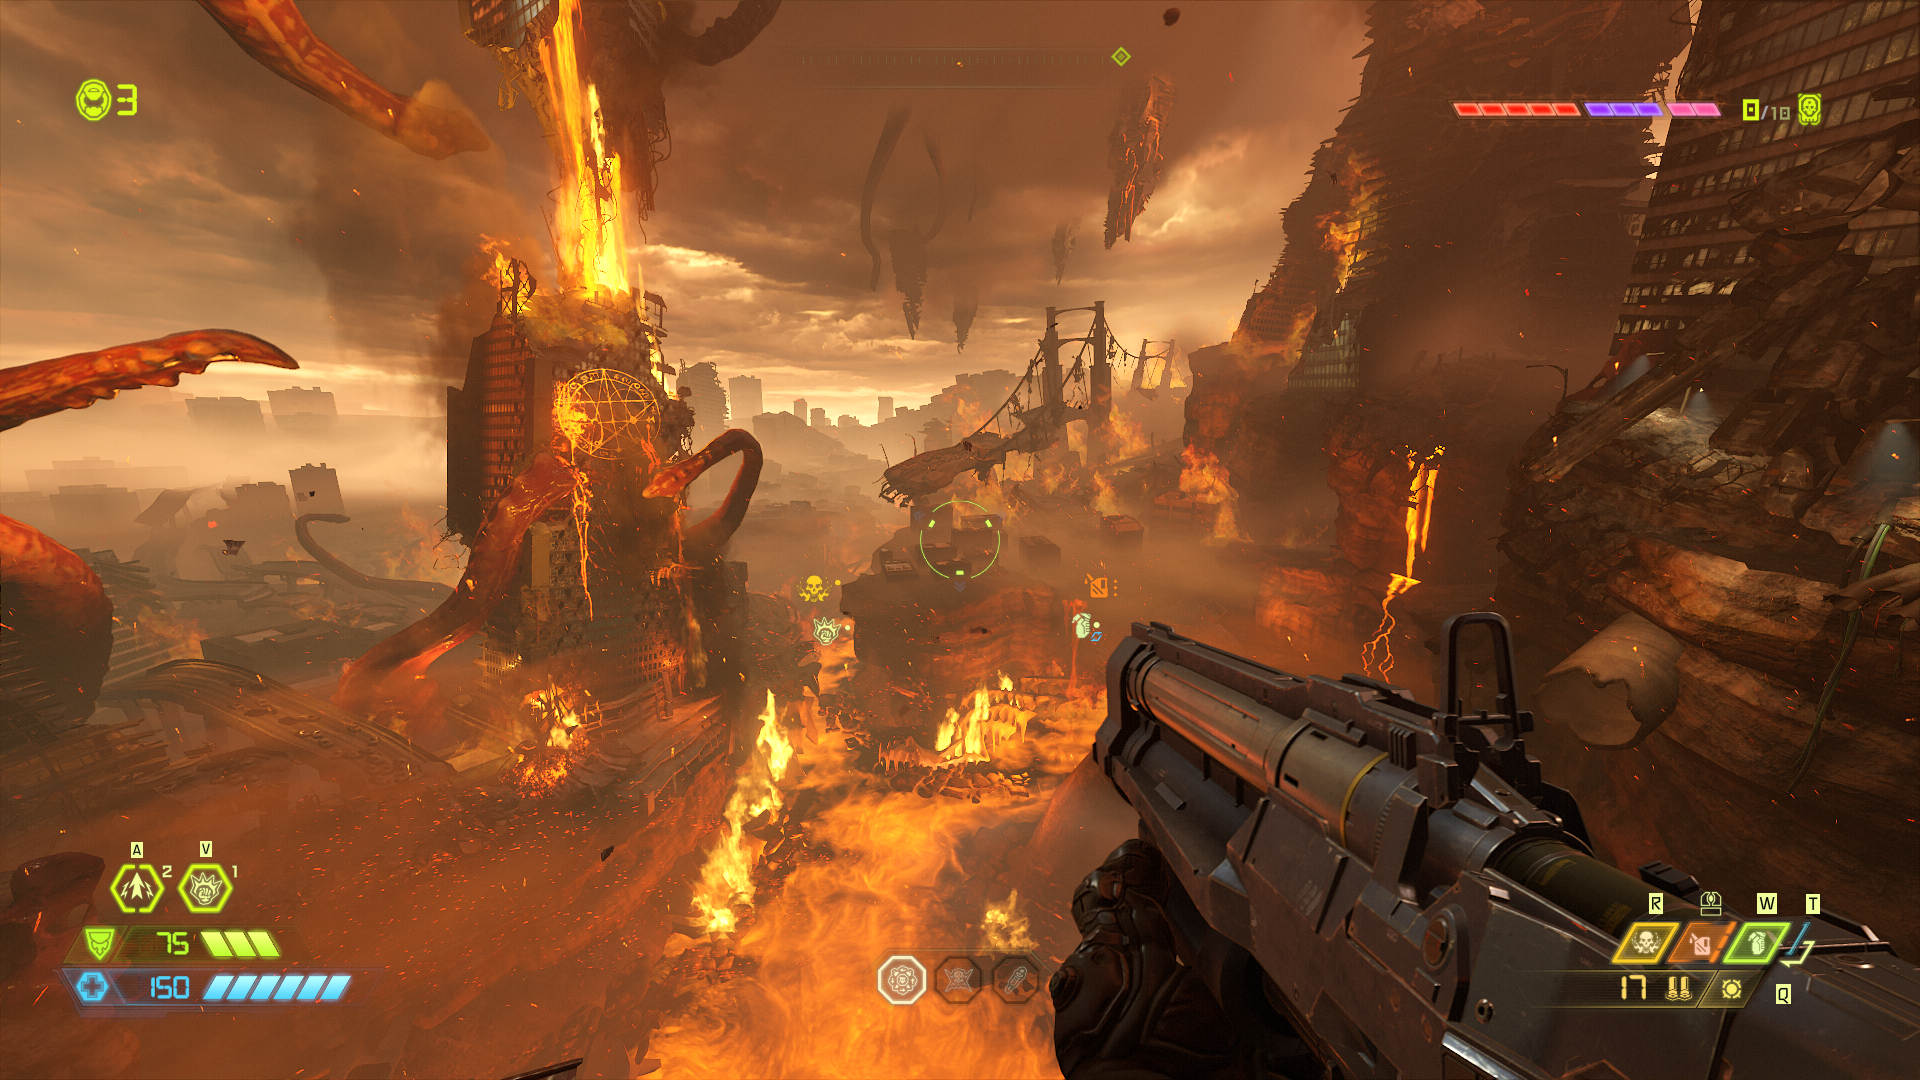 A city burning and surrounded by lava and big tentacles.